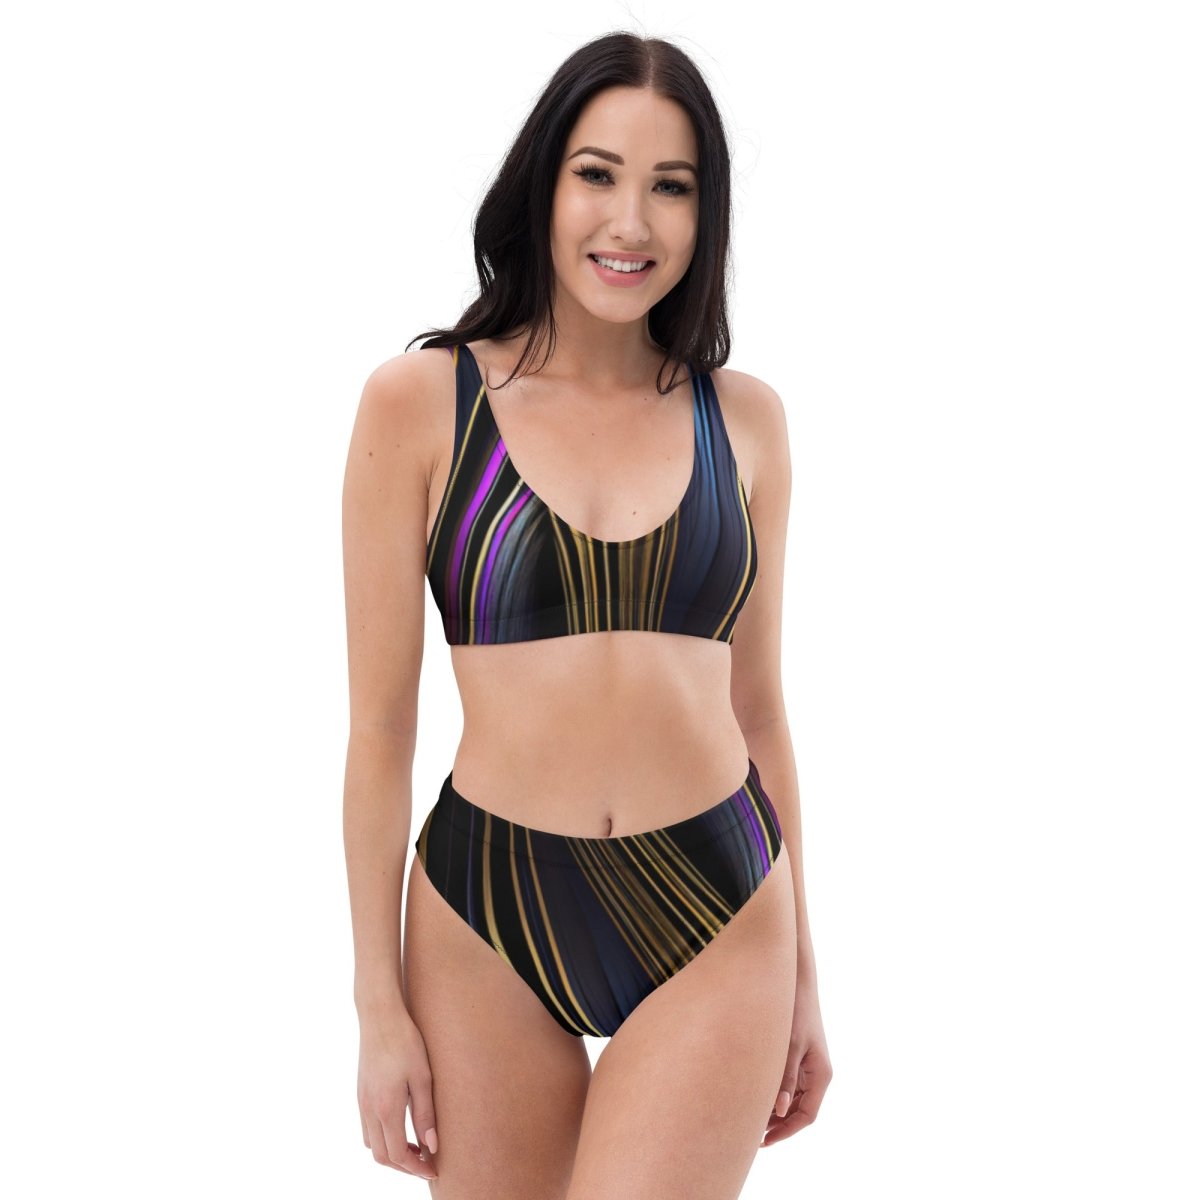 Golden Flow Recycled High-waisted Bikini | Sefira Beach Collection Woman - Swimsuit - Sefira Collections